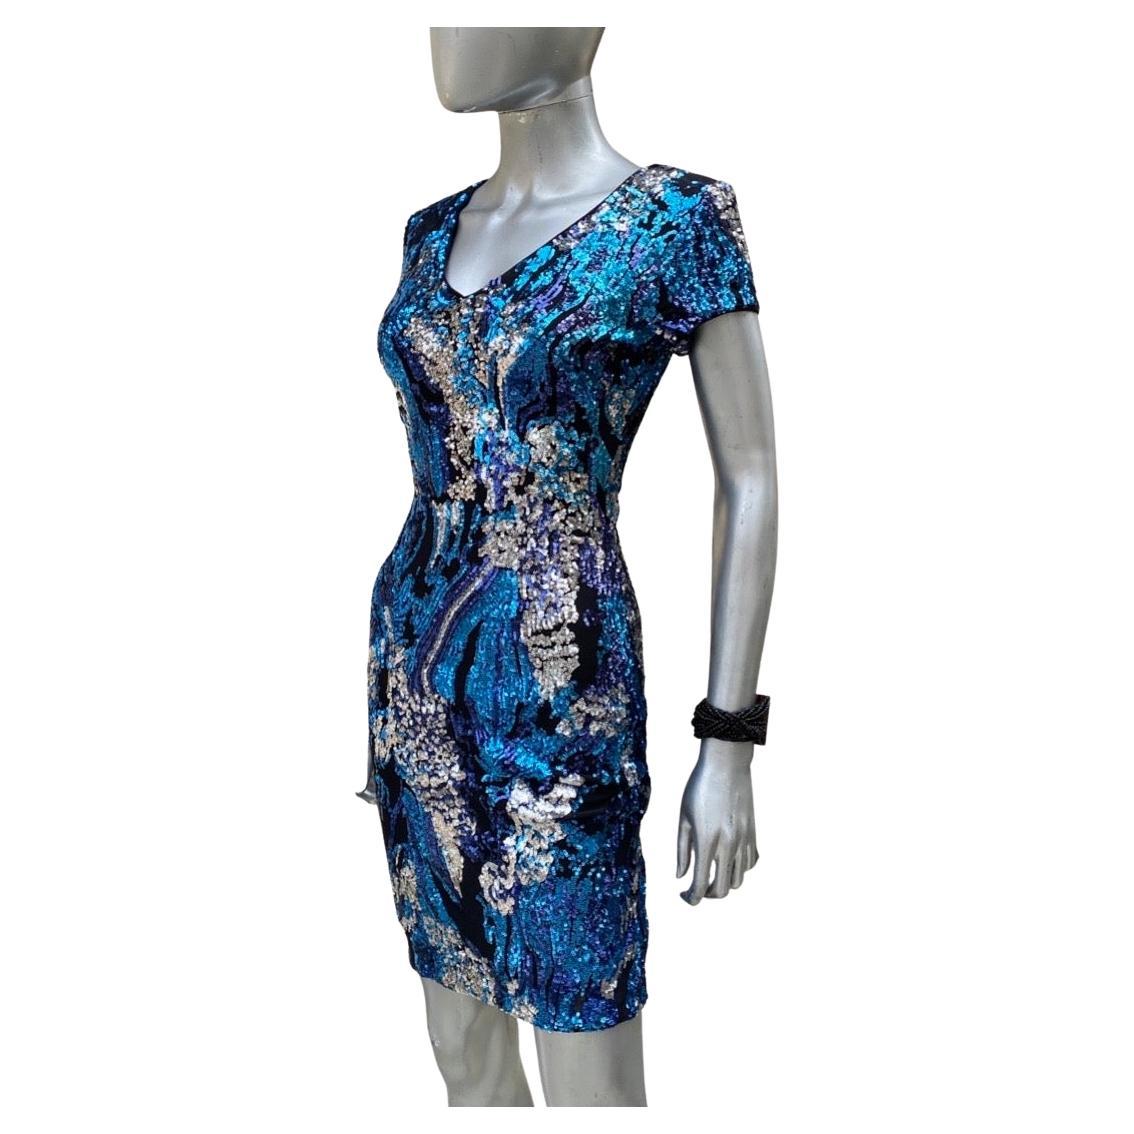 Sequin Abstract Sexy Dress w/ Full Zipper Back by ALexia Ardmor NWT Sz XS/S For Sale